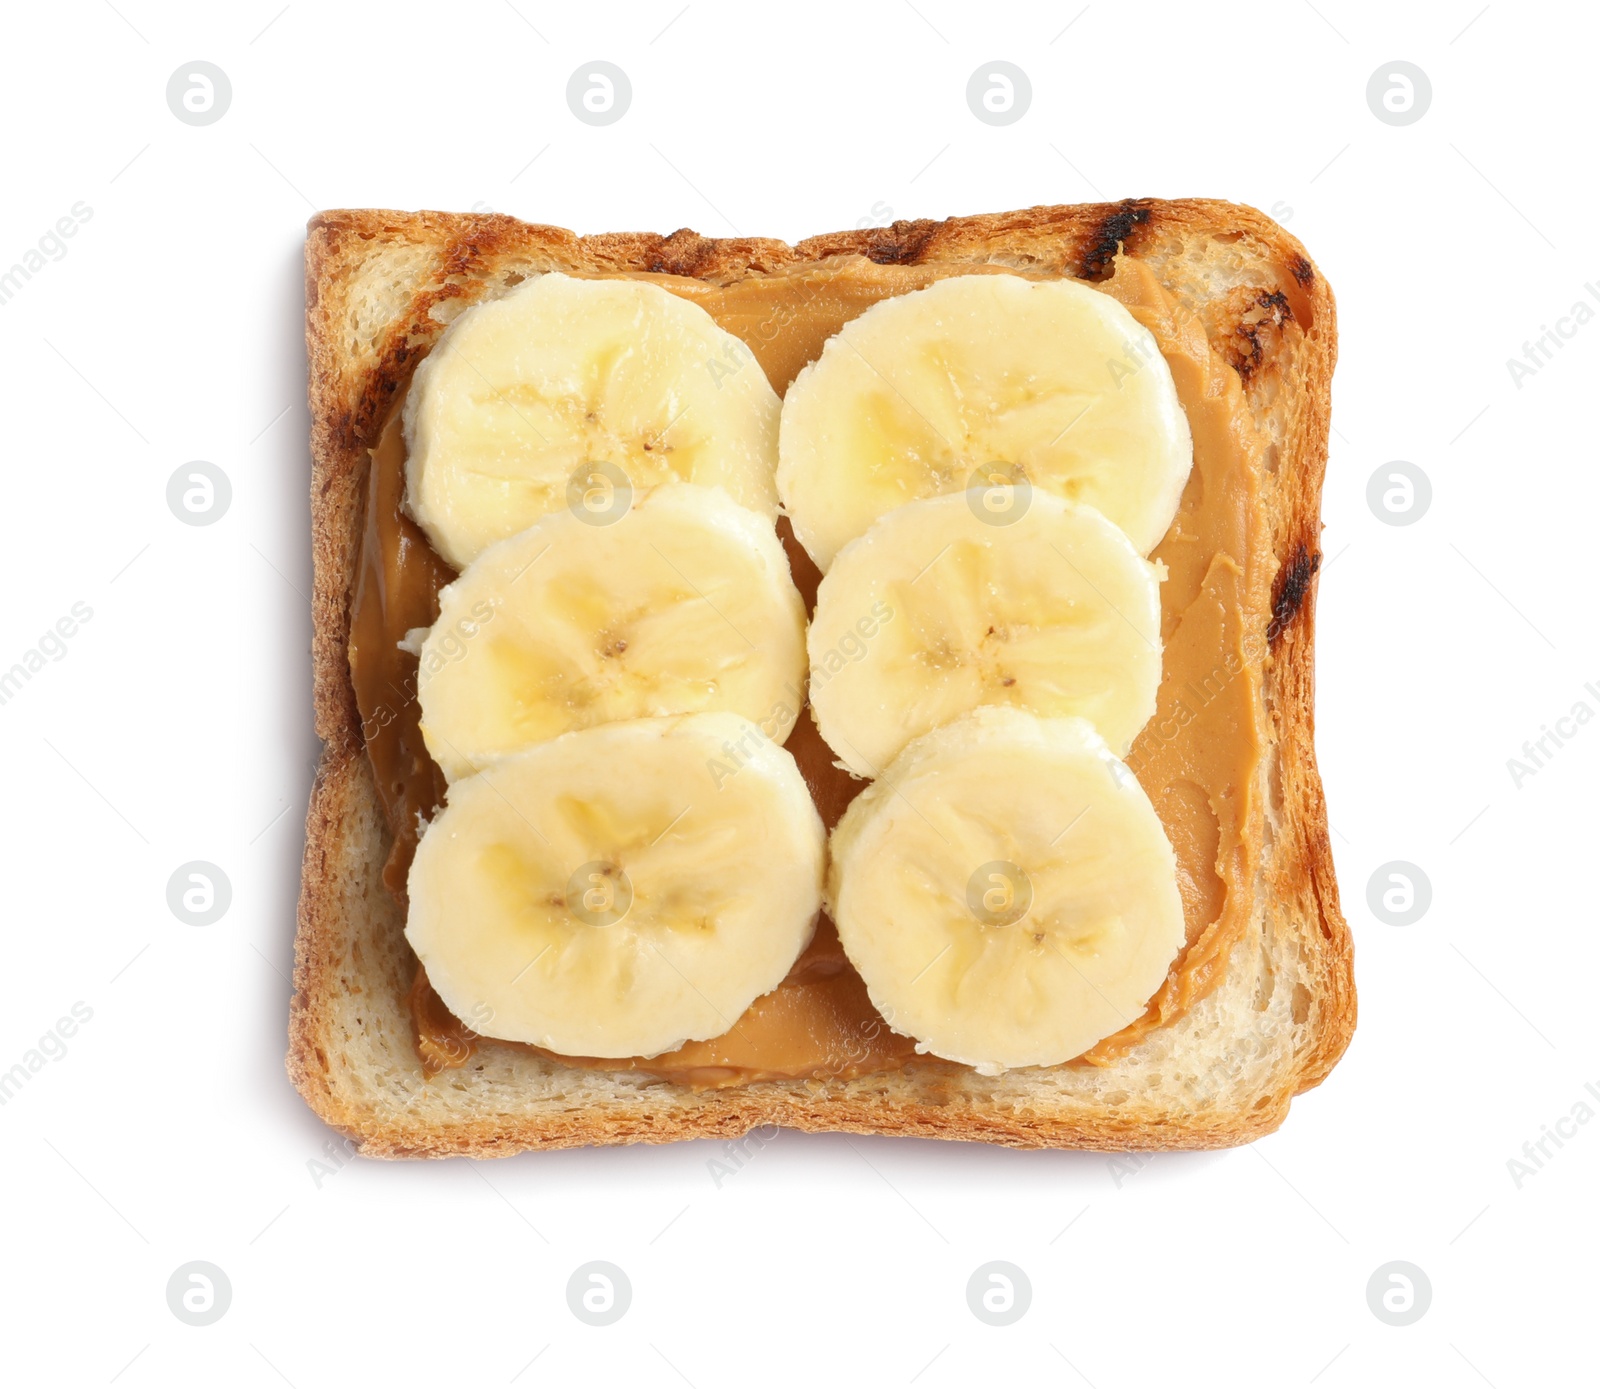 Photo of Toast bread with tasty peanut butter and banana slices on white background